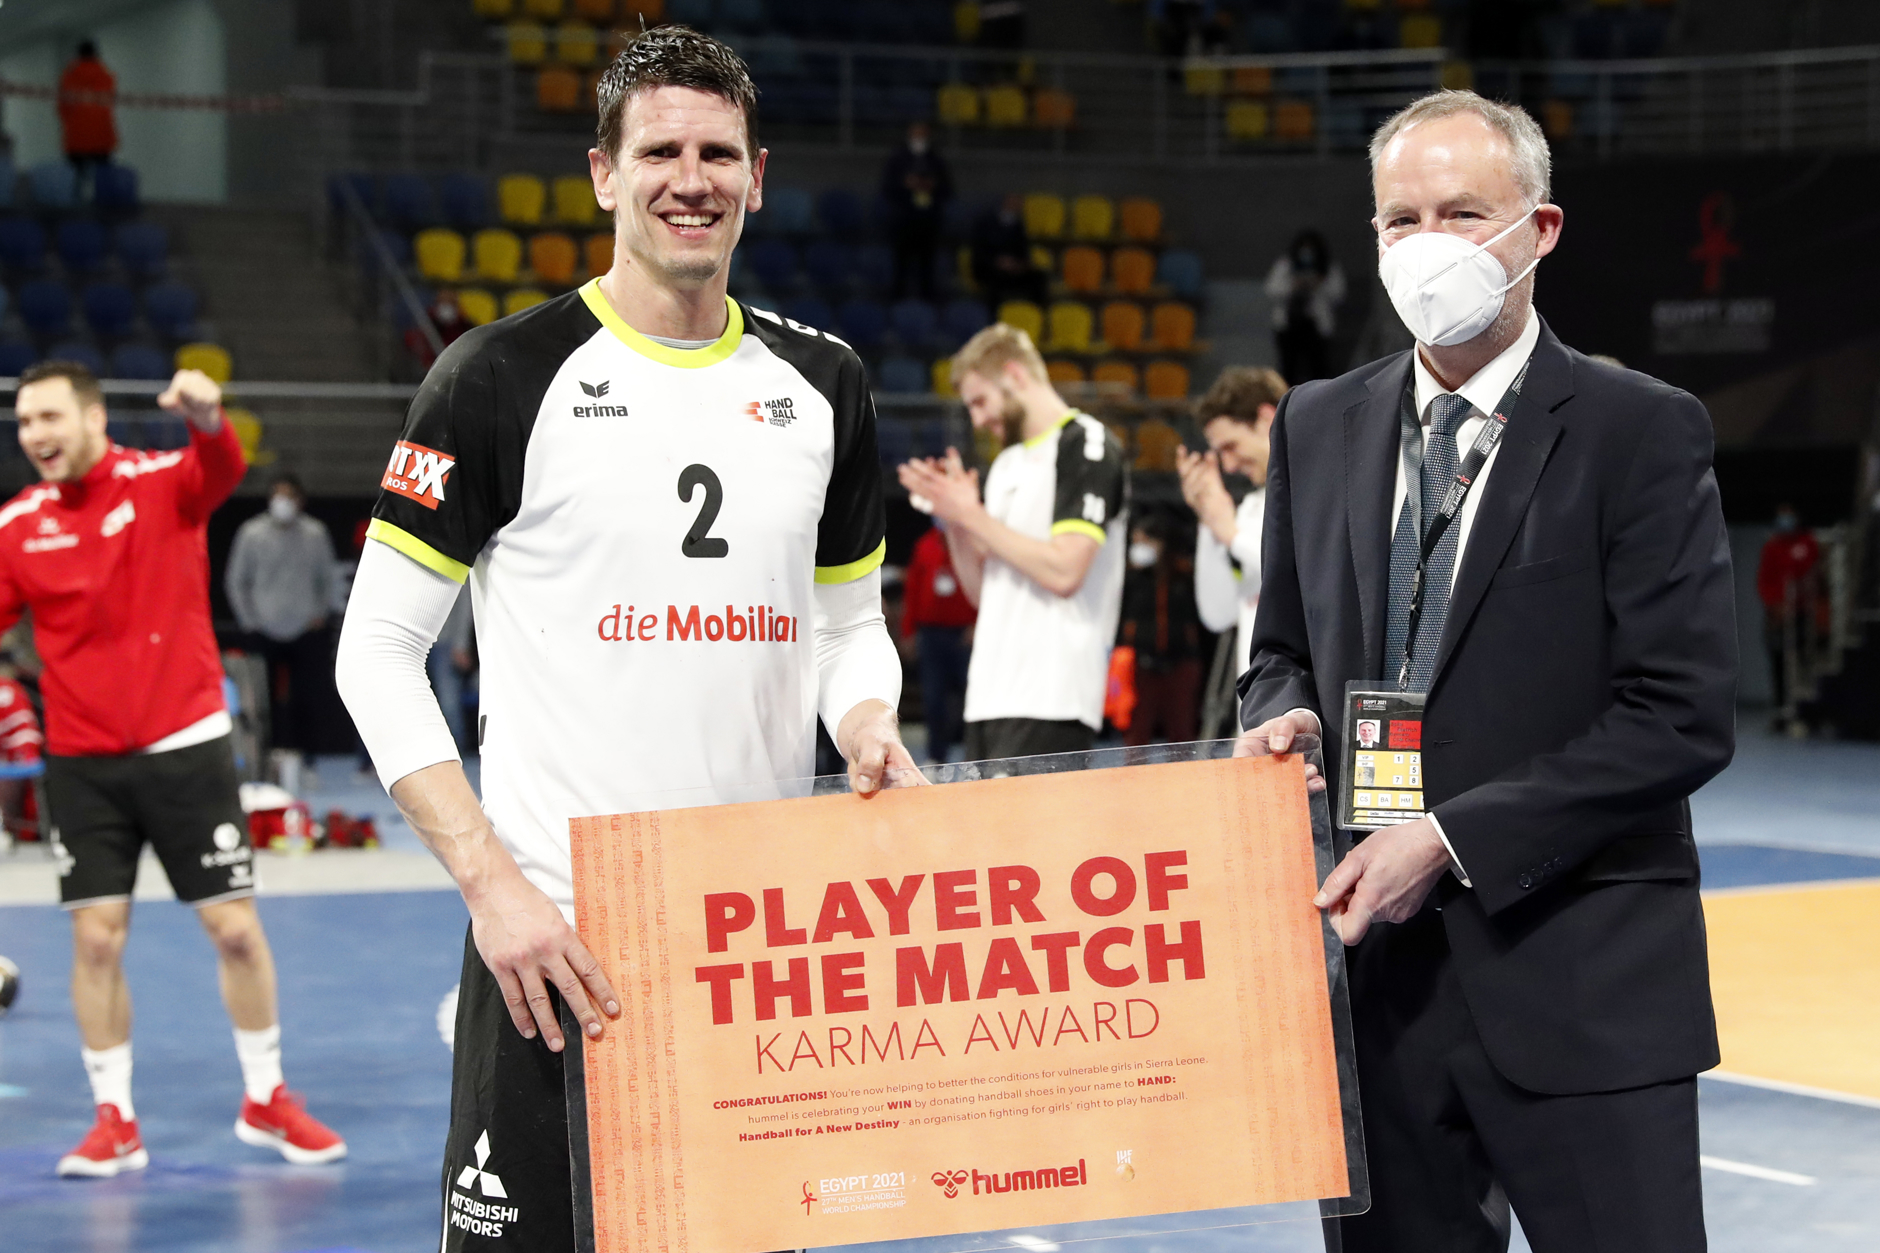 Andy Schmid "Player of the Match"